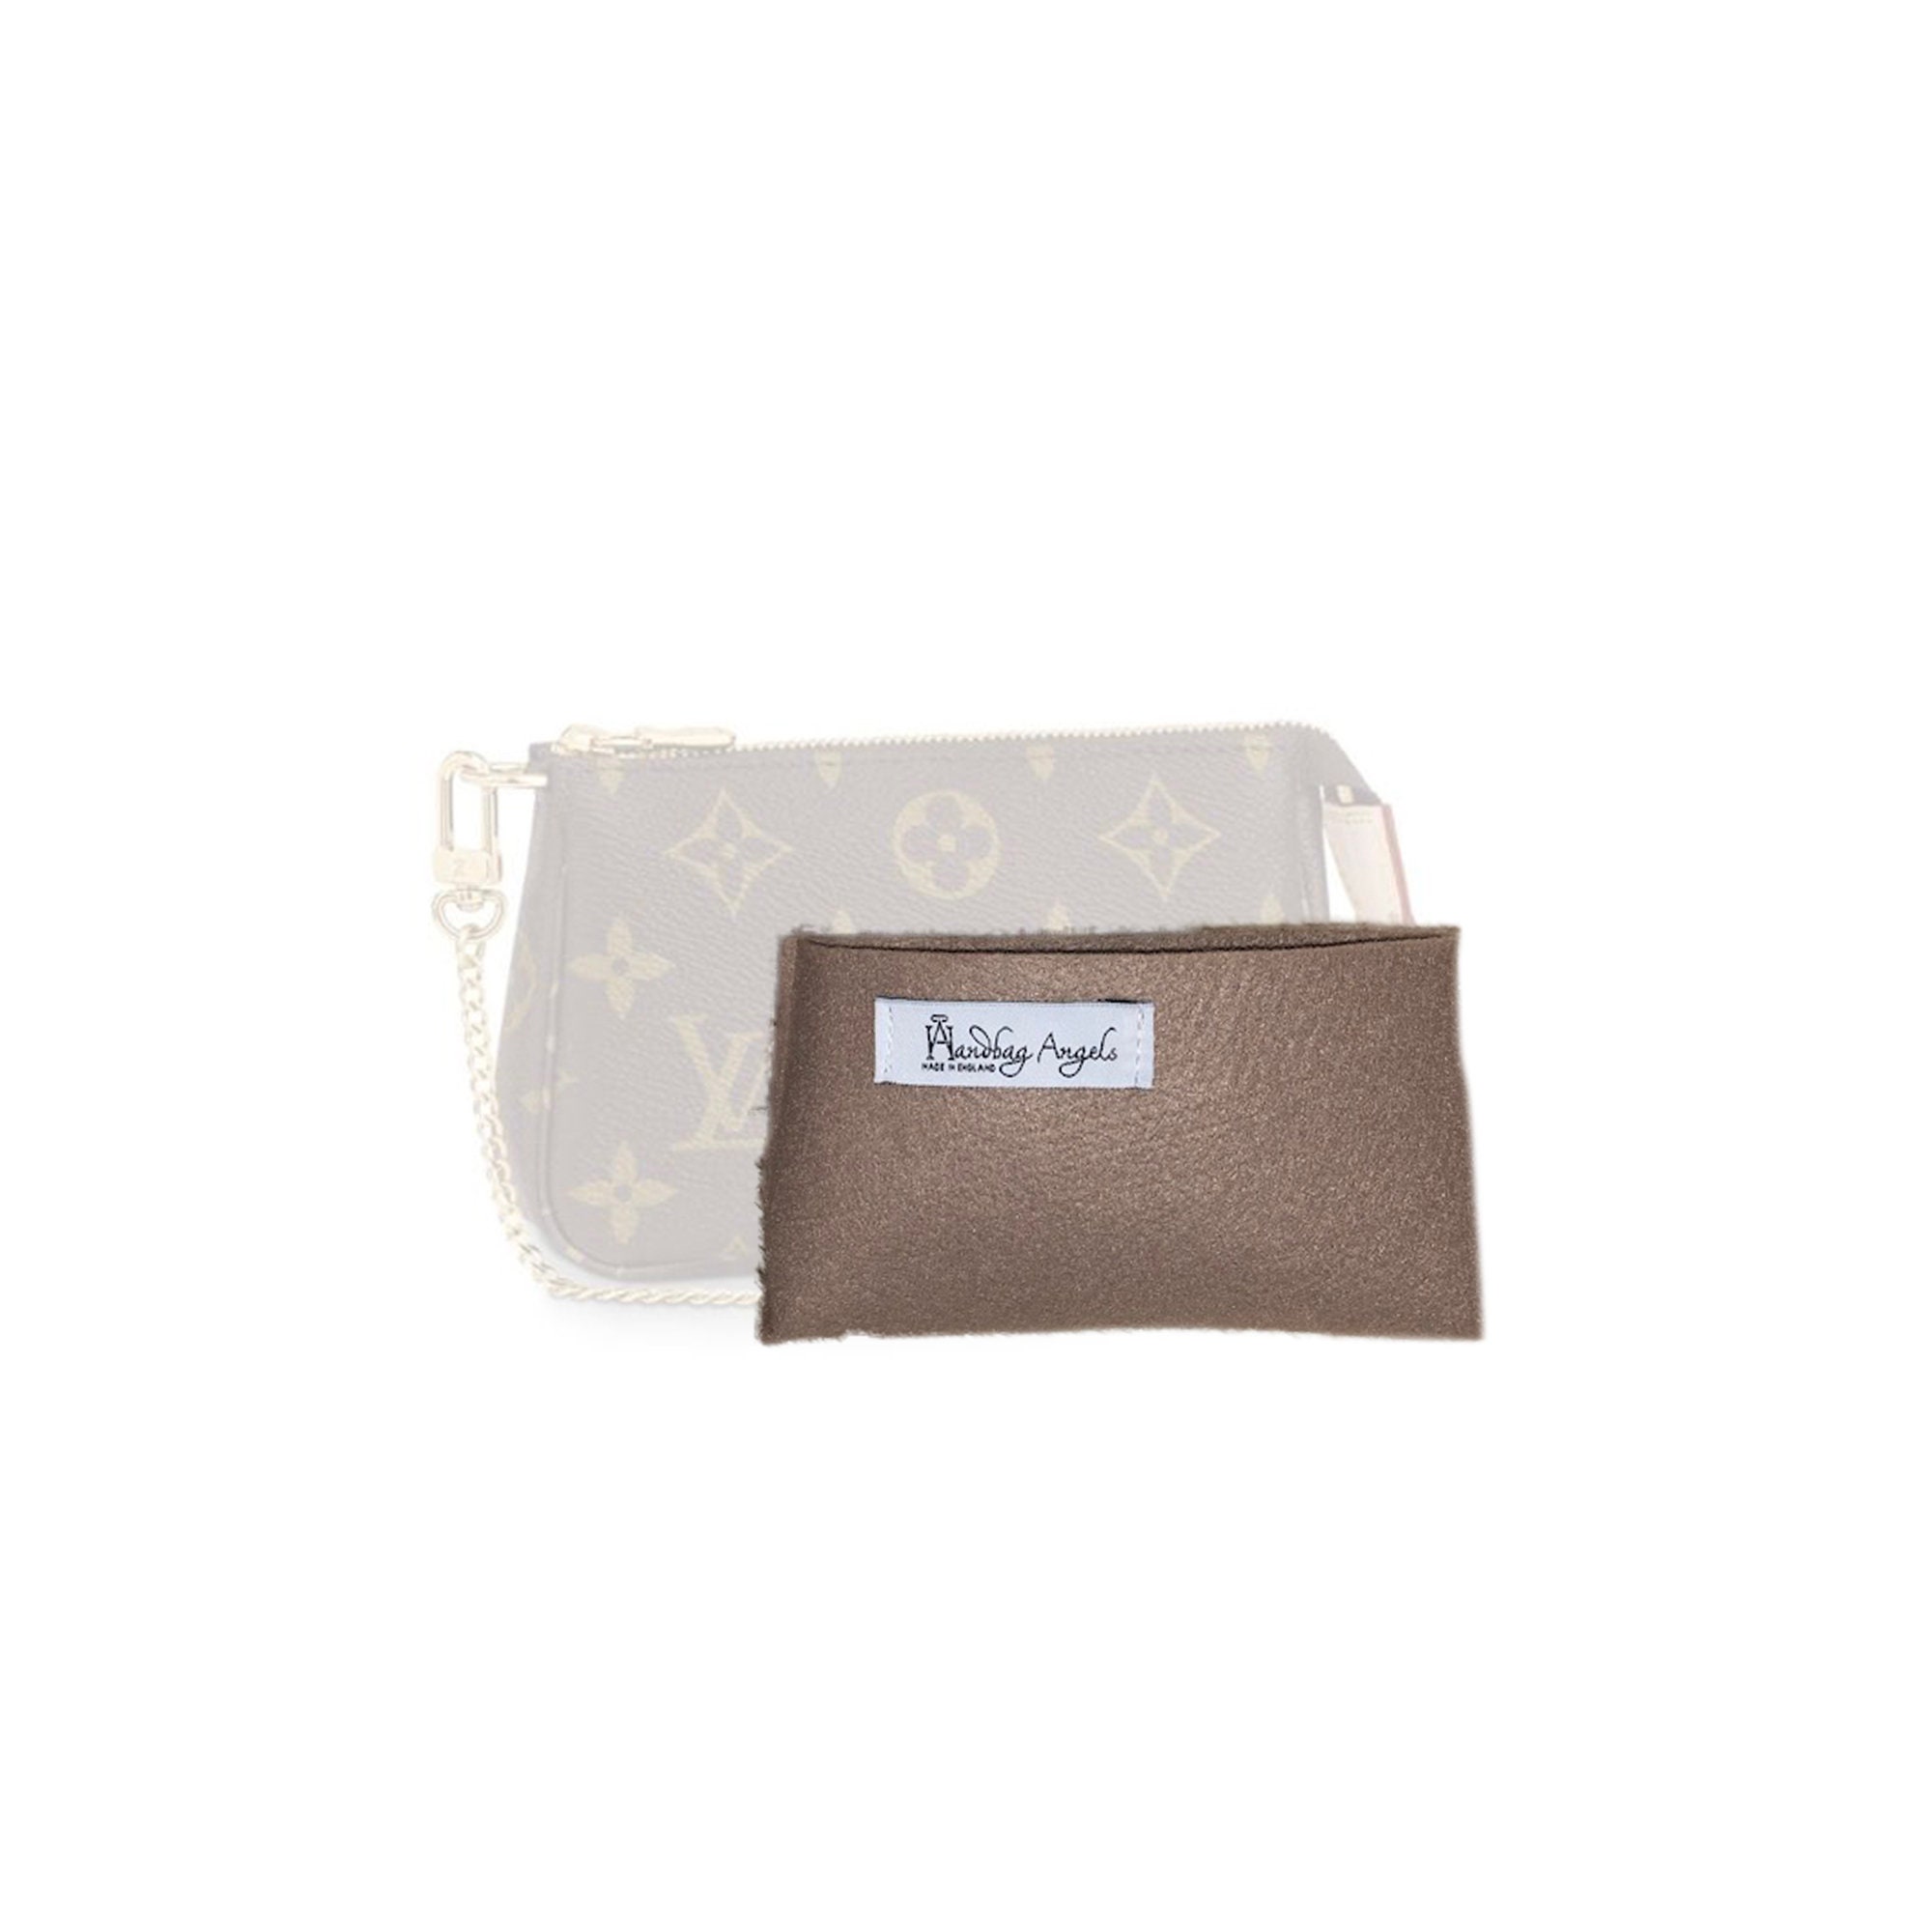 Buy For Old Pochette Mini Accessories M58009-bottom Online in India 